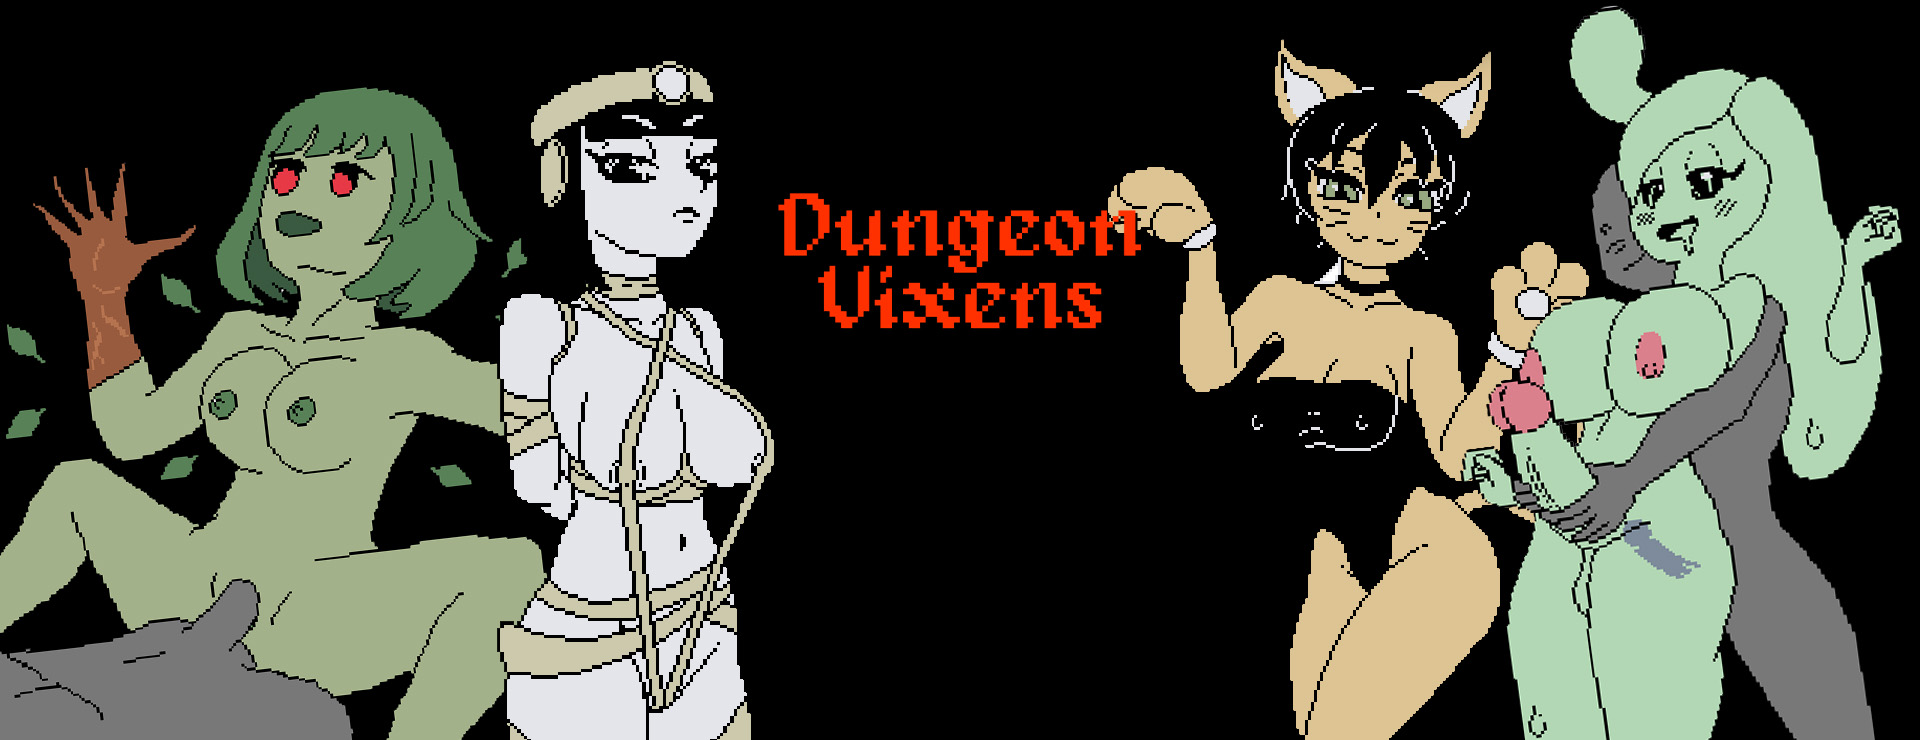 Dungeon Vixens: A Tale of Temptation - アドベンチャー ゲーム